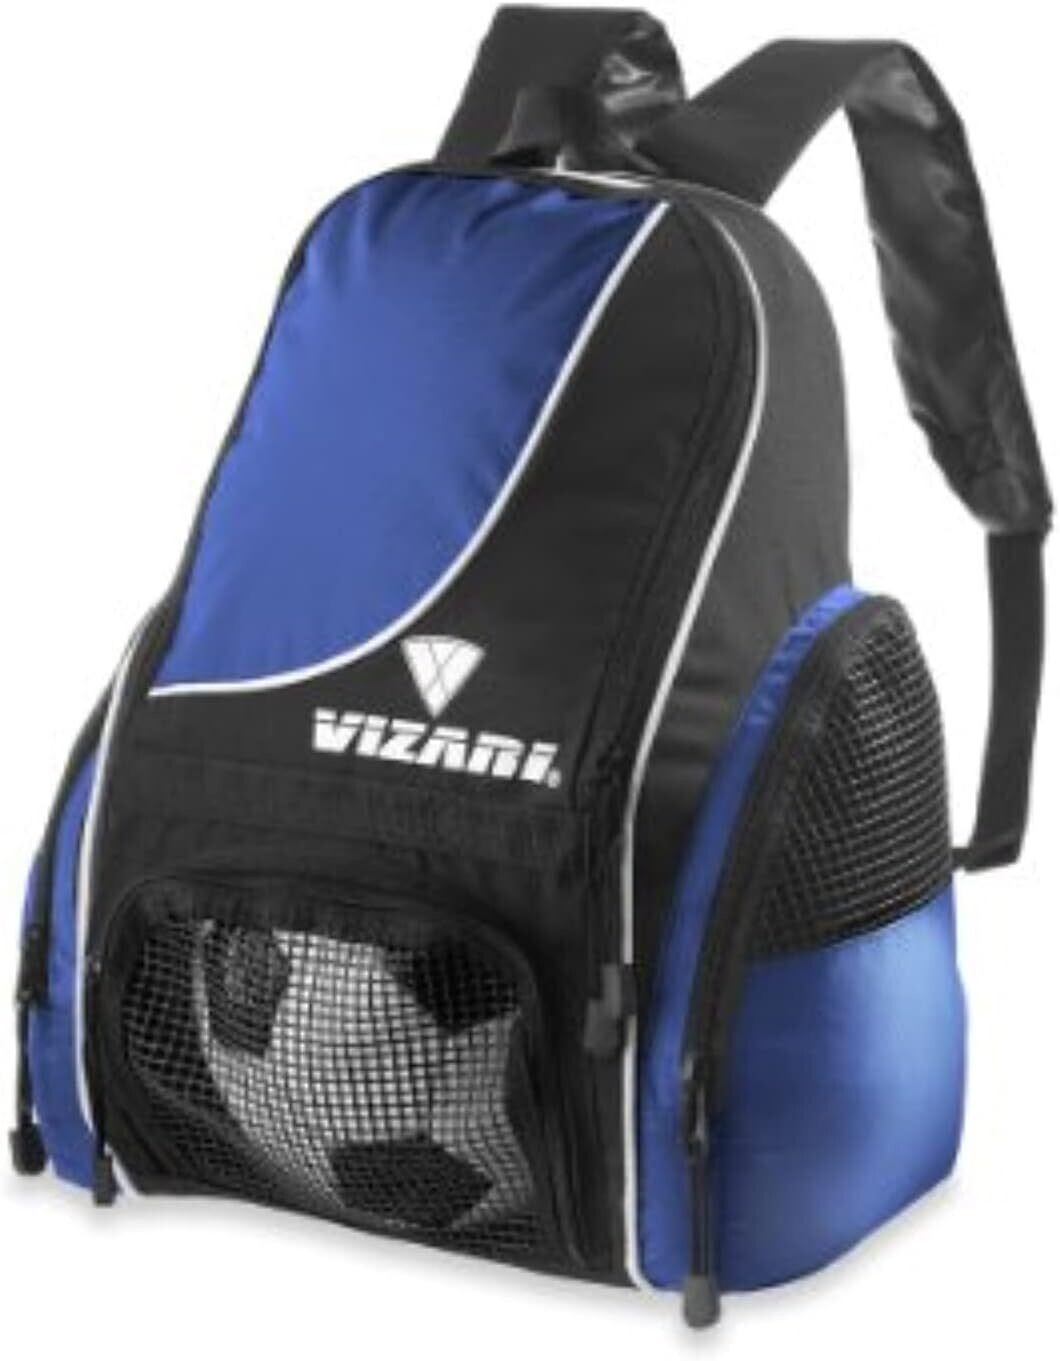 Vizari Solano Soccer Backpack With Ball Compartment and Vented Ball Pocket